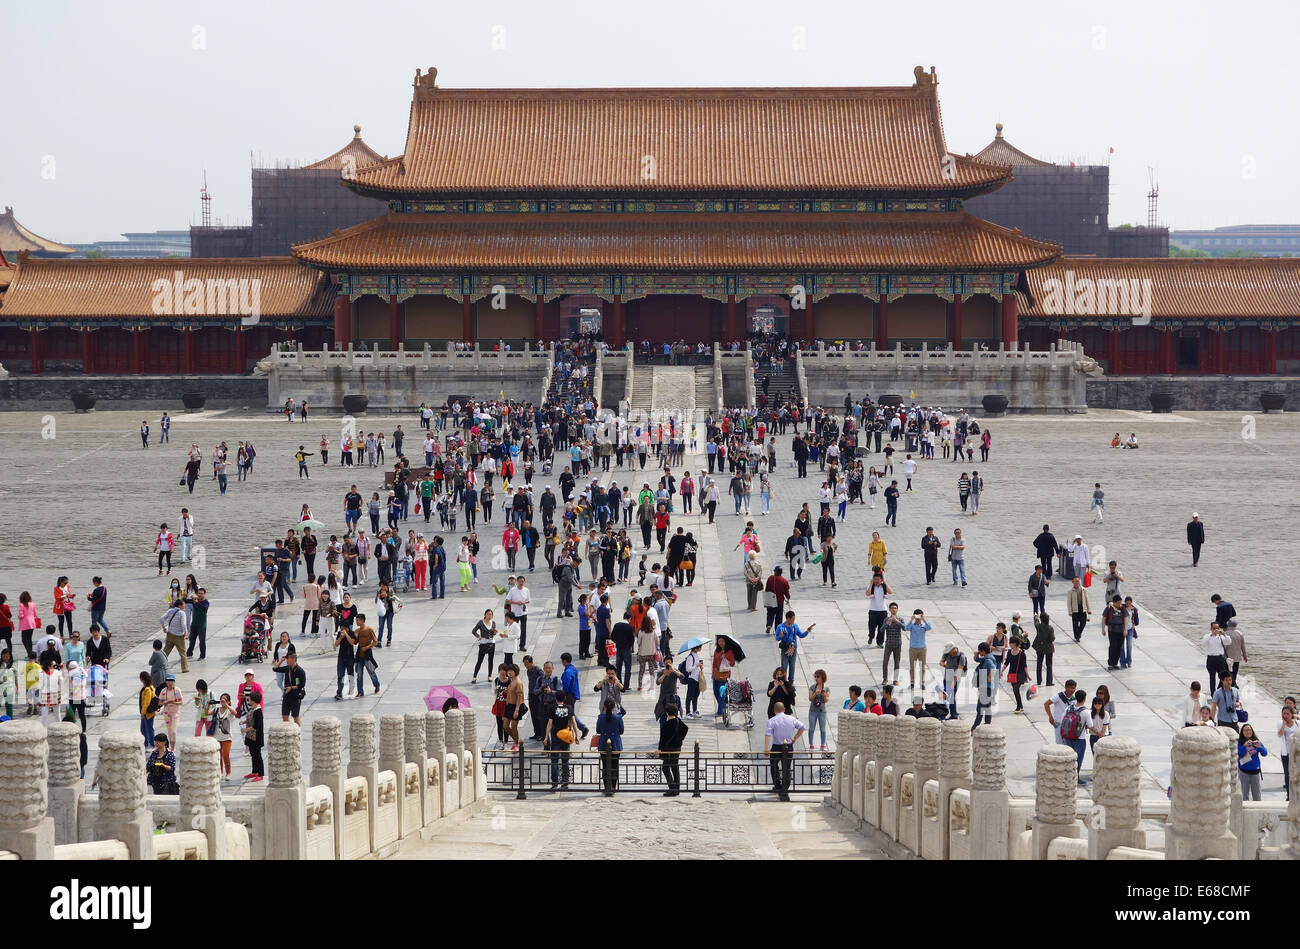 Forbidden City, courtyard at the Hall of Supreme Harmony, Outer Court, Forbidden City, Beijing, People's Republic of China, Asia Stock Photo